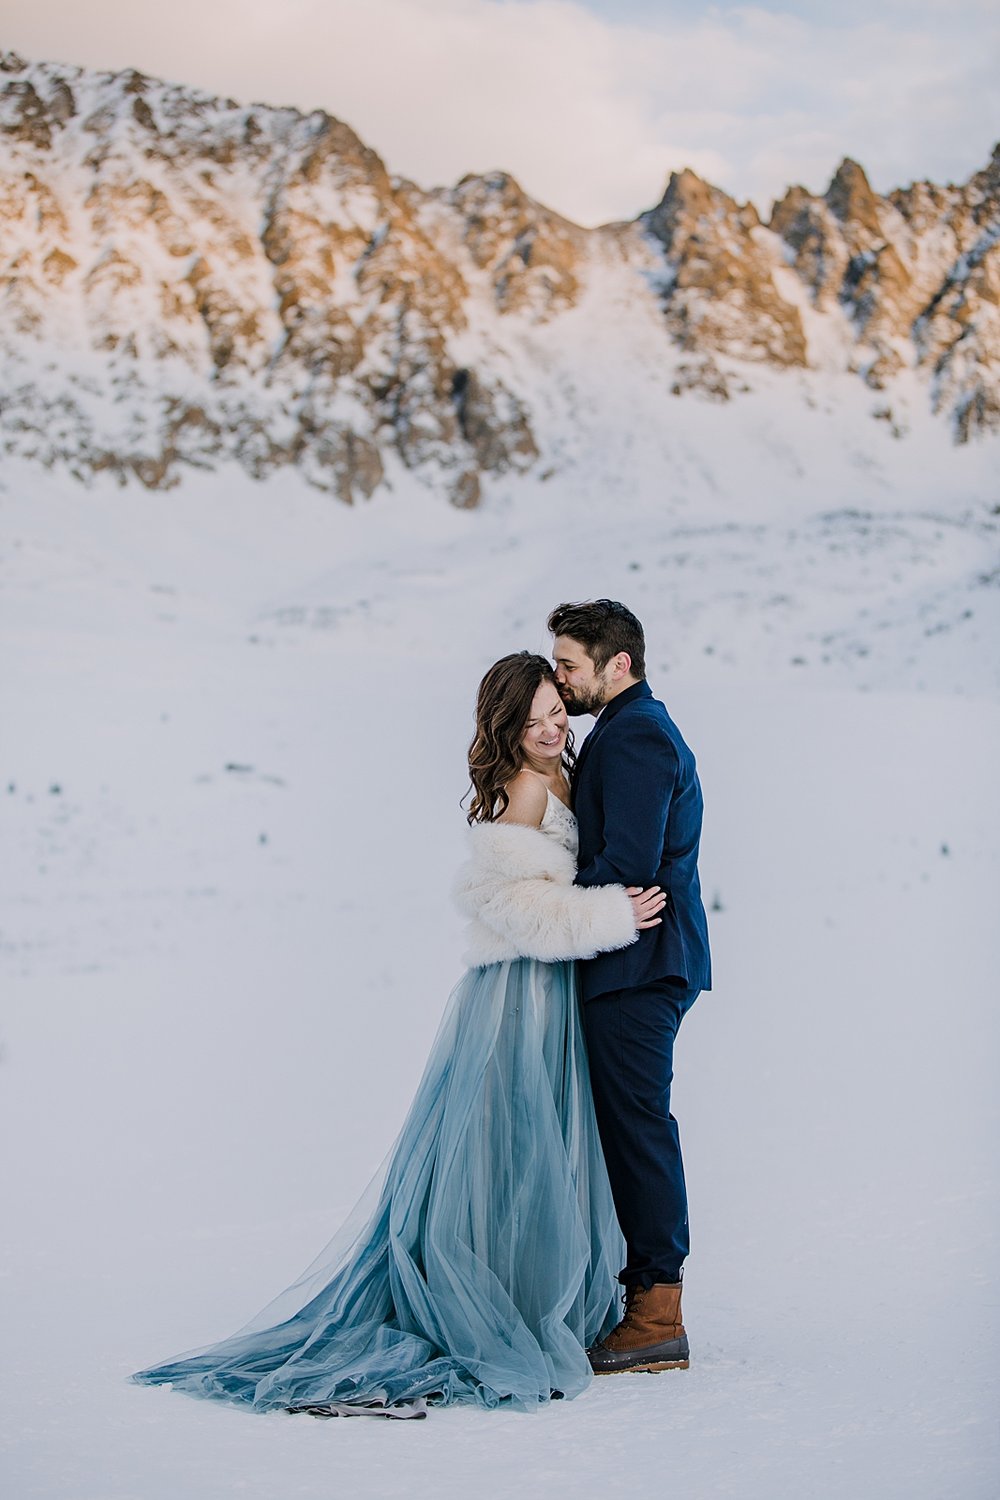 bride and groom embracing in the snow, snowy walk, winter elopement hiking boots, winter wedding hiking boots, winter alpenglow in mayflower gulch, sunset in mayflower gulch